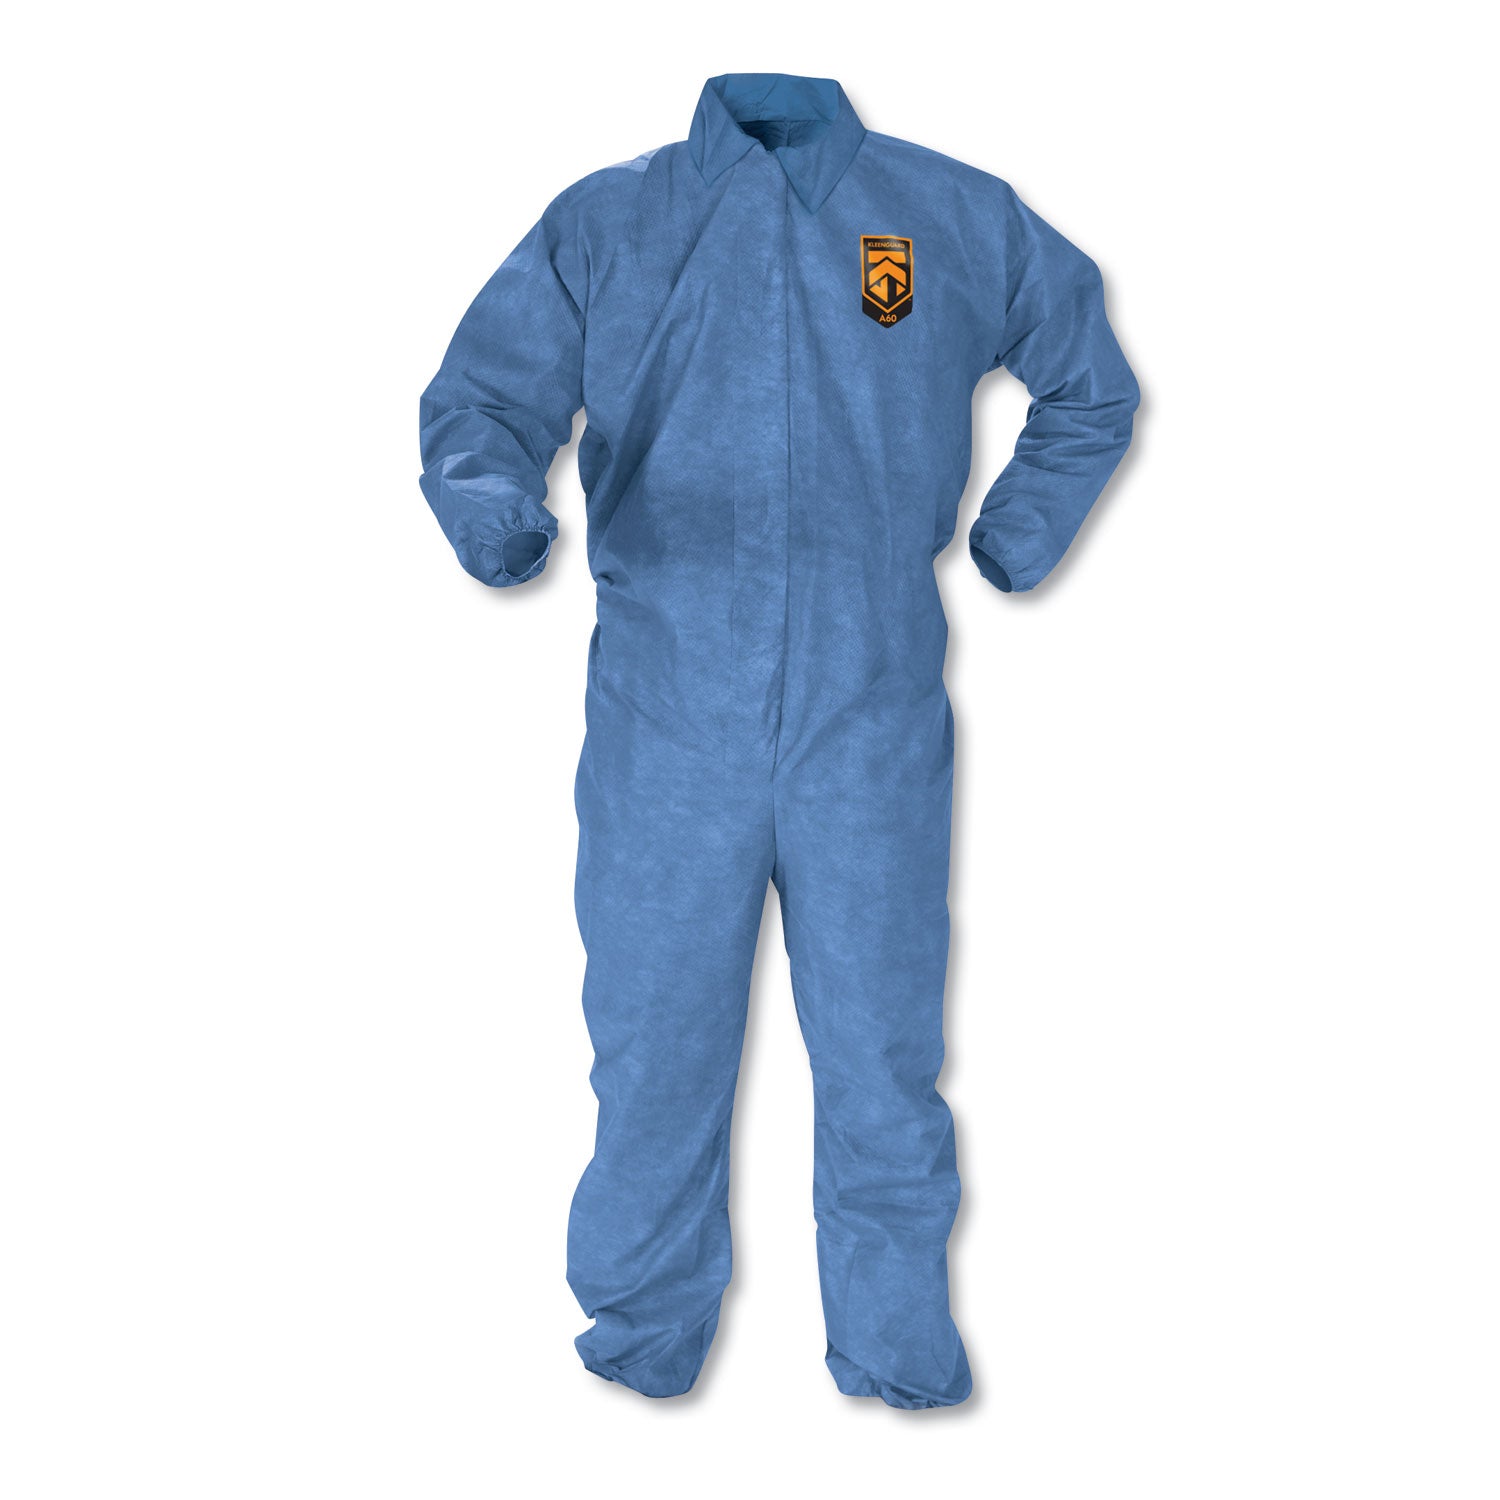 a60-elastic-cuff-ankle-and-back-coveralls-large-blue-24-carton_kcc45003 - 1